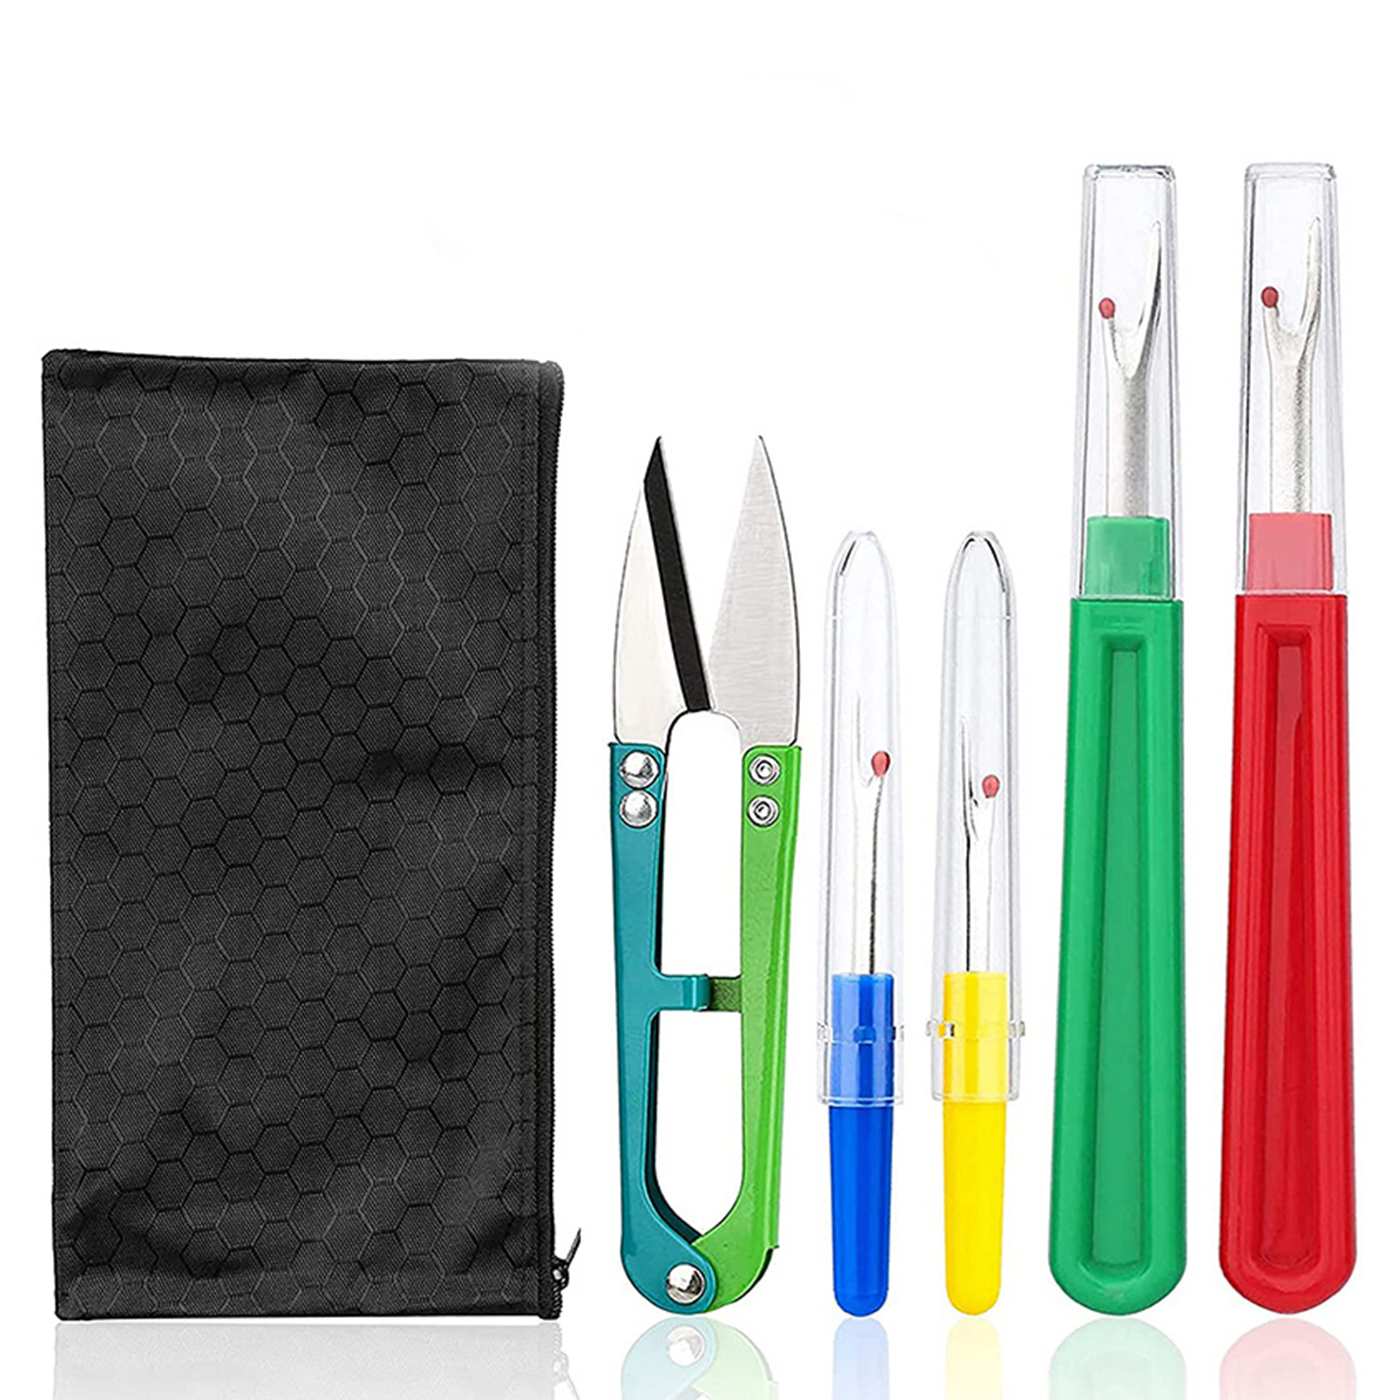 Seam Ripper and Thread Remover Kit,2 Big and 2 Small Sewing Stitch Thread Unpicker and 1 Sewing Trimming Scissor Nipper Tool for Thread Remove